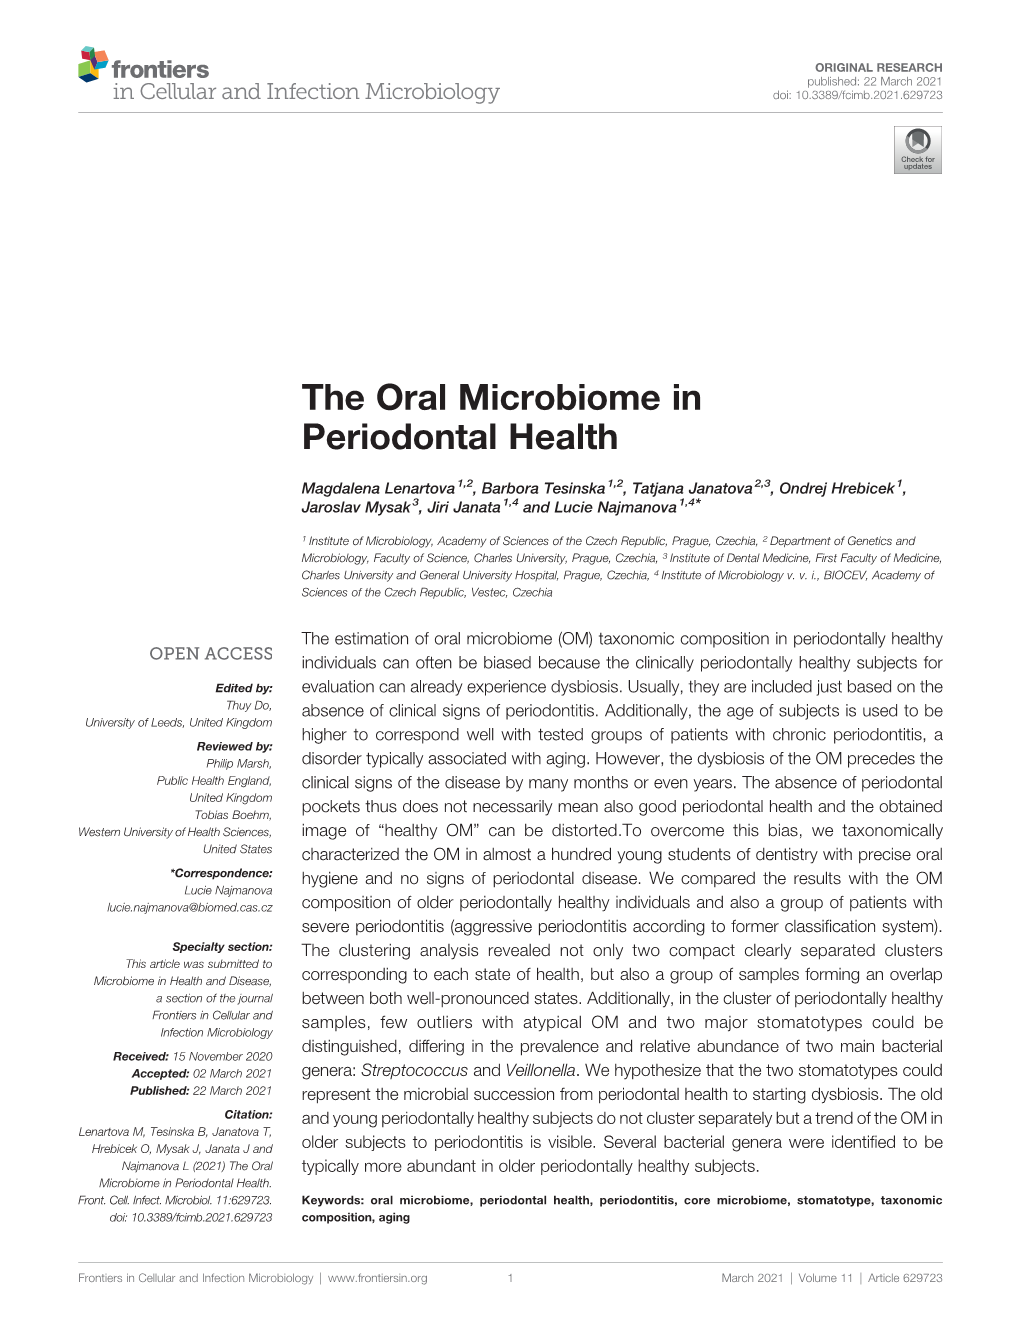 The Oral Microbiome in Periodontal Health